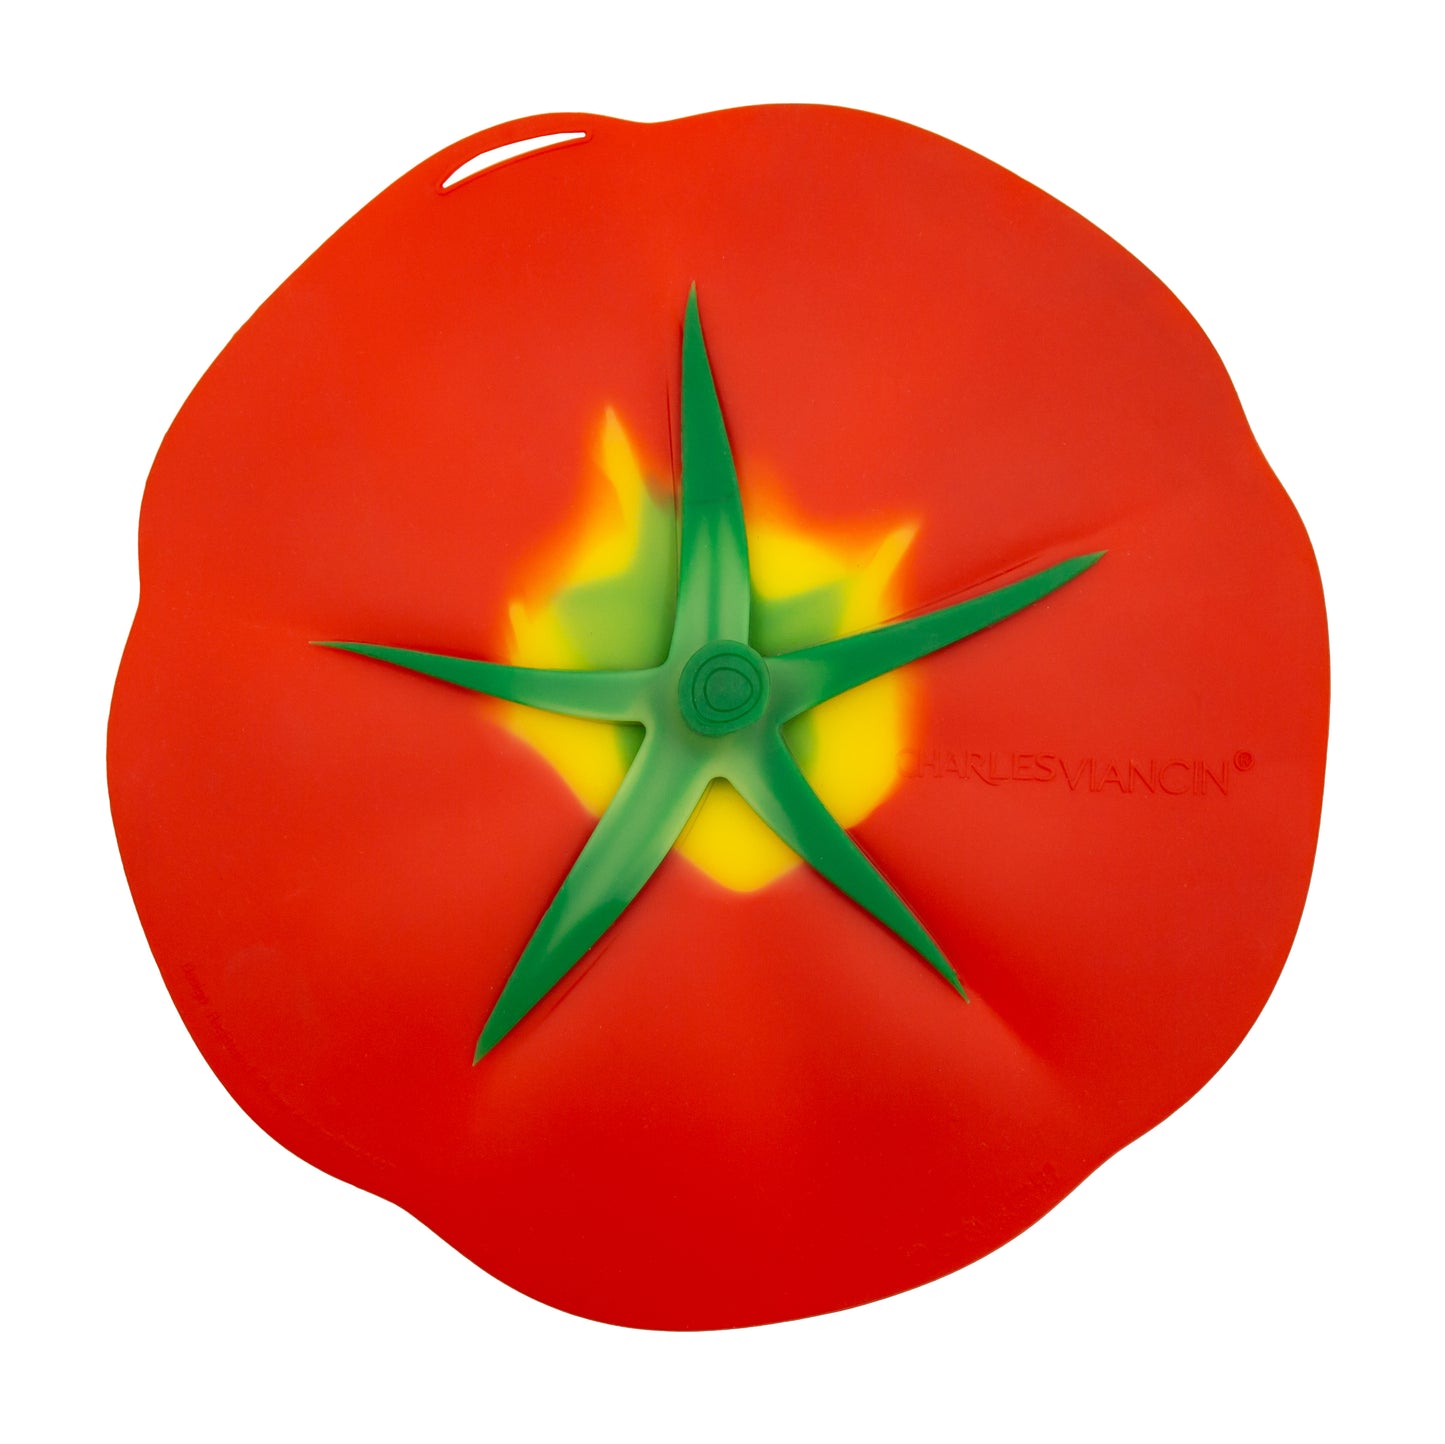 french made tomato silicon lid